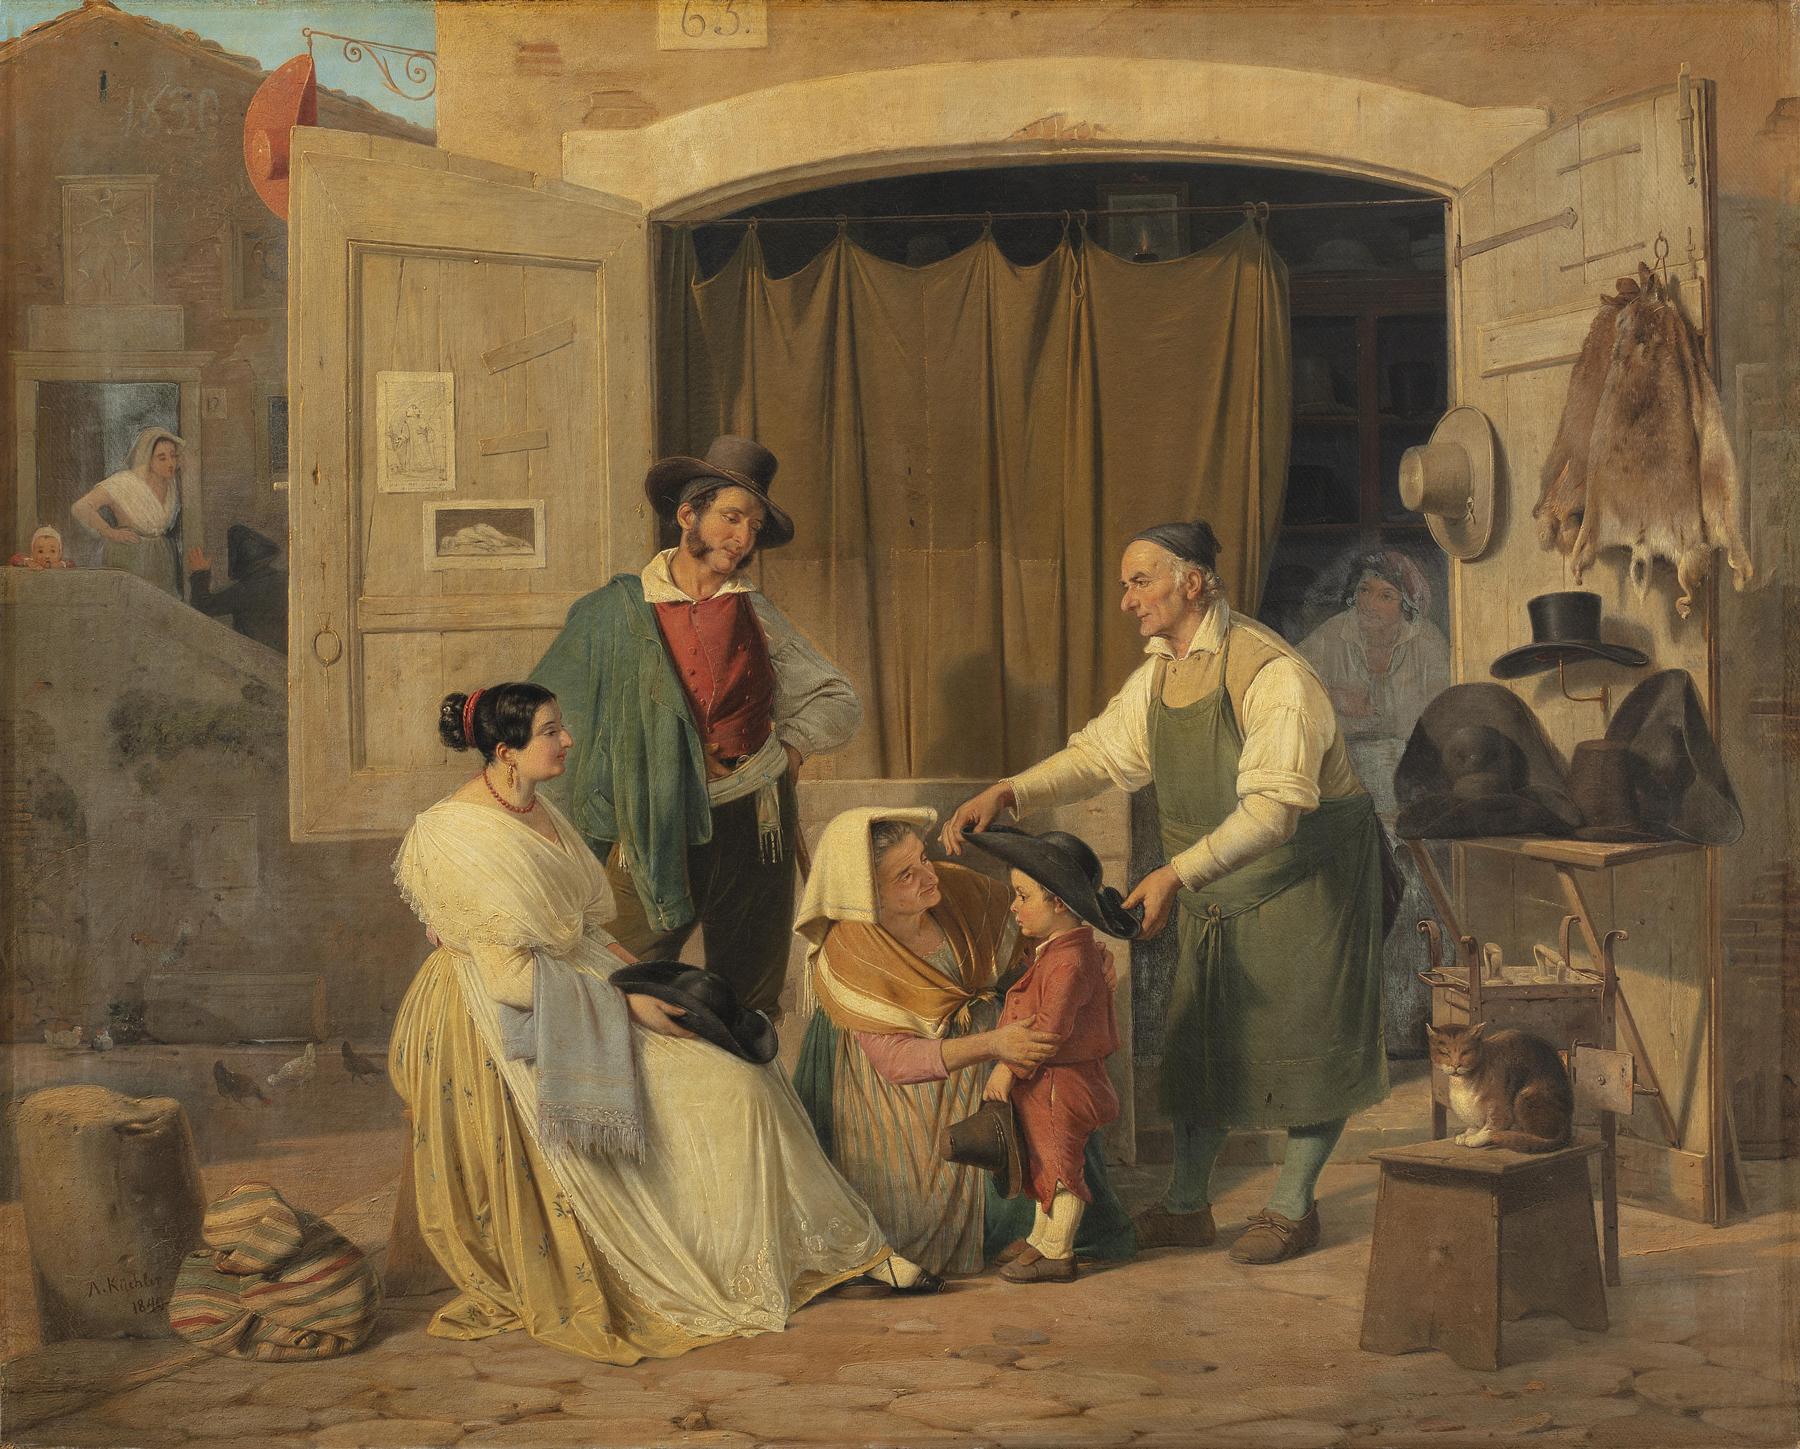 Roman Peasants Buying a Hat for Their Little Son, Supposed to Become an Abbot, B246